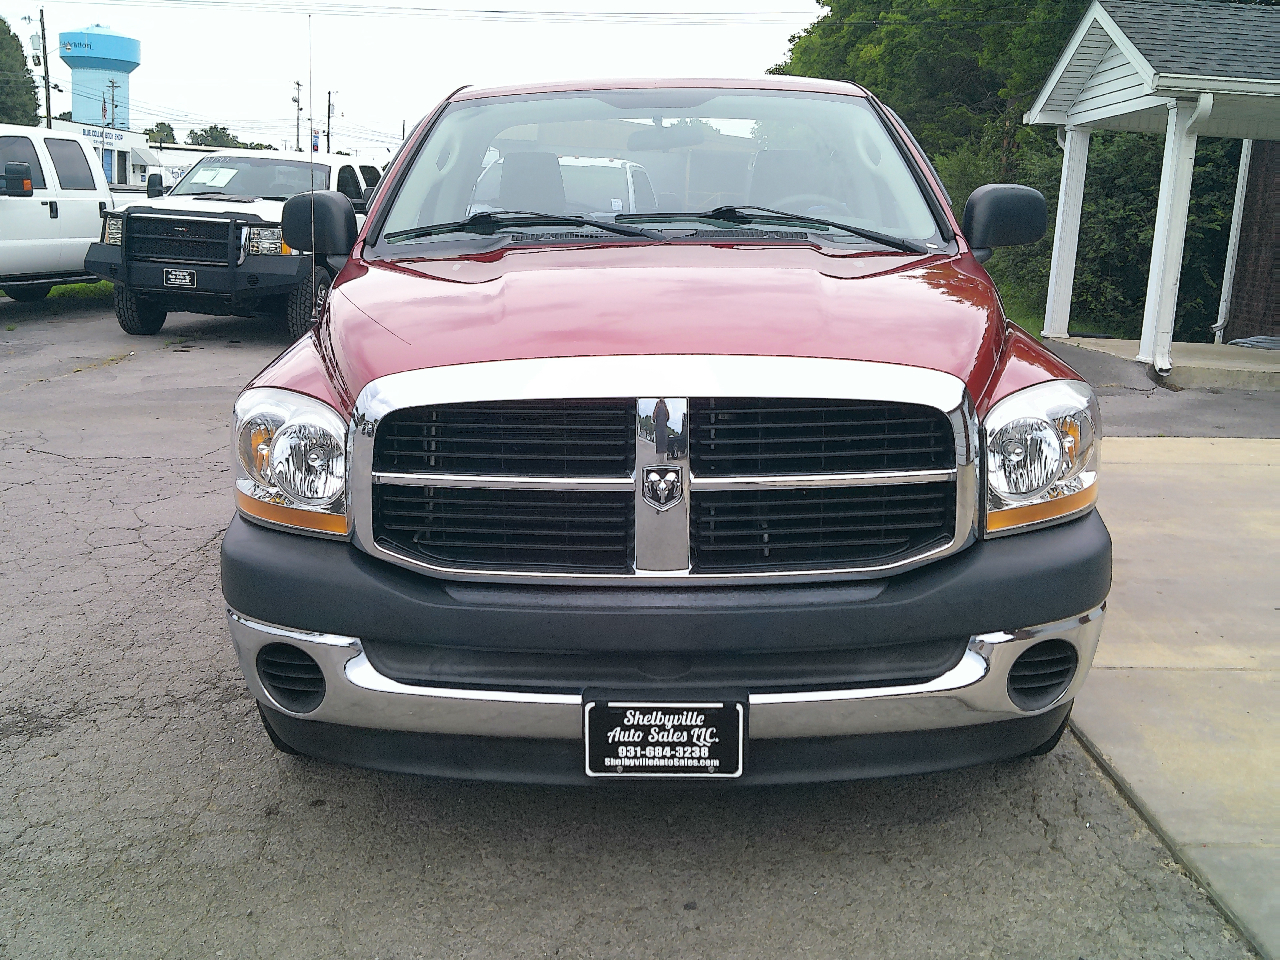 2006 Dodge Ram 1500 WOW CHECK IT OUTLOW MILEAGE1 OWNERWELL MAINTAINED